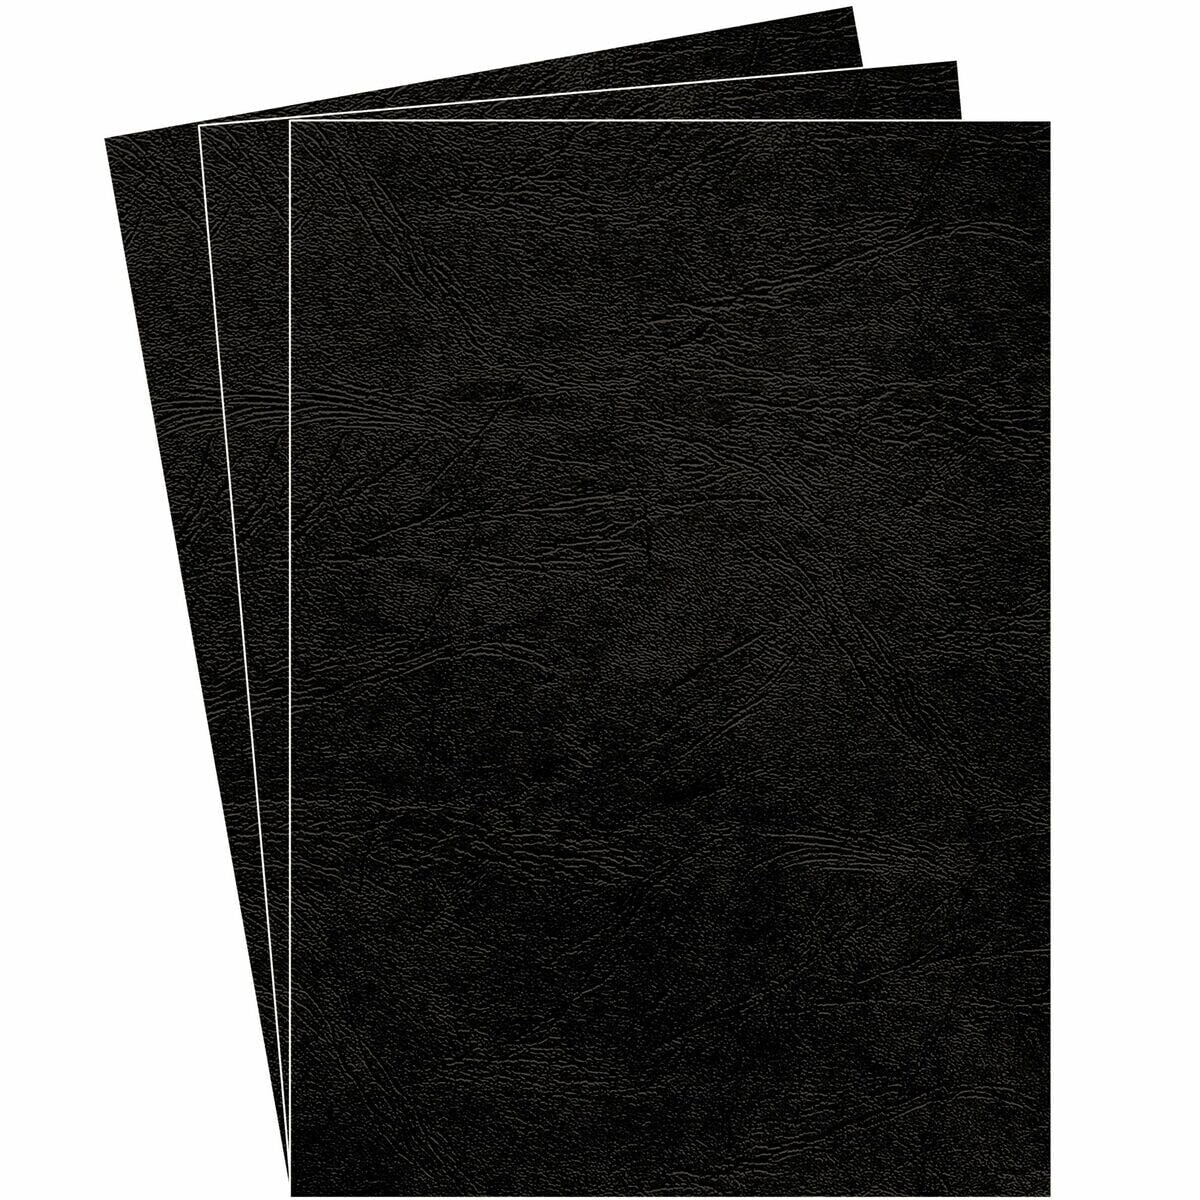 Binding covers Fellowes Delta 100 Units Black A4 Cardboard